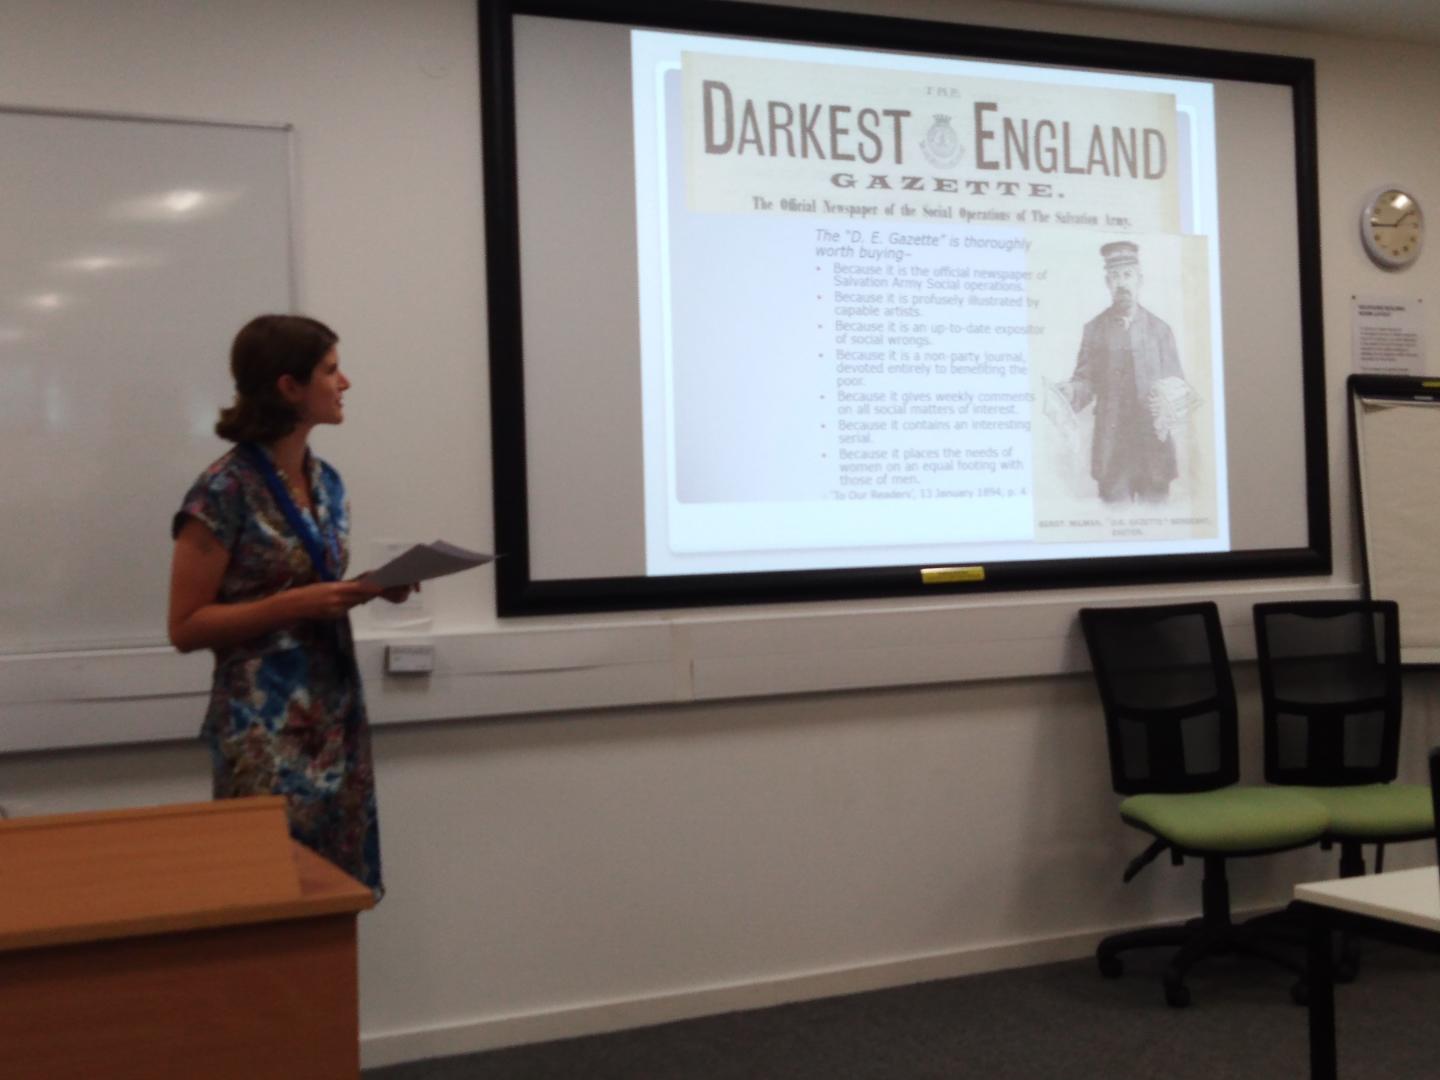 Dr Flore Janssen presenting her paper ‘New Approaches to the Salvation Army Social Work: the Digital Darkest England Gazette, 1893-94', BAVS Conference, 2019